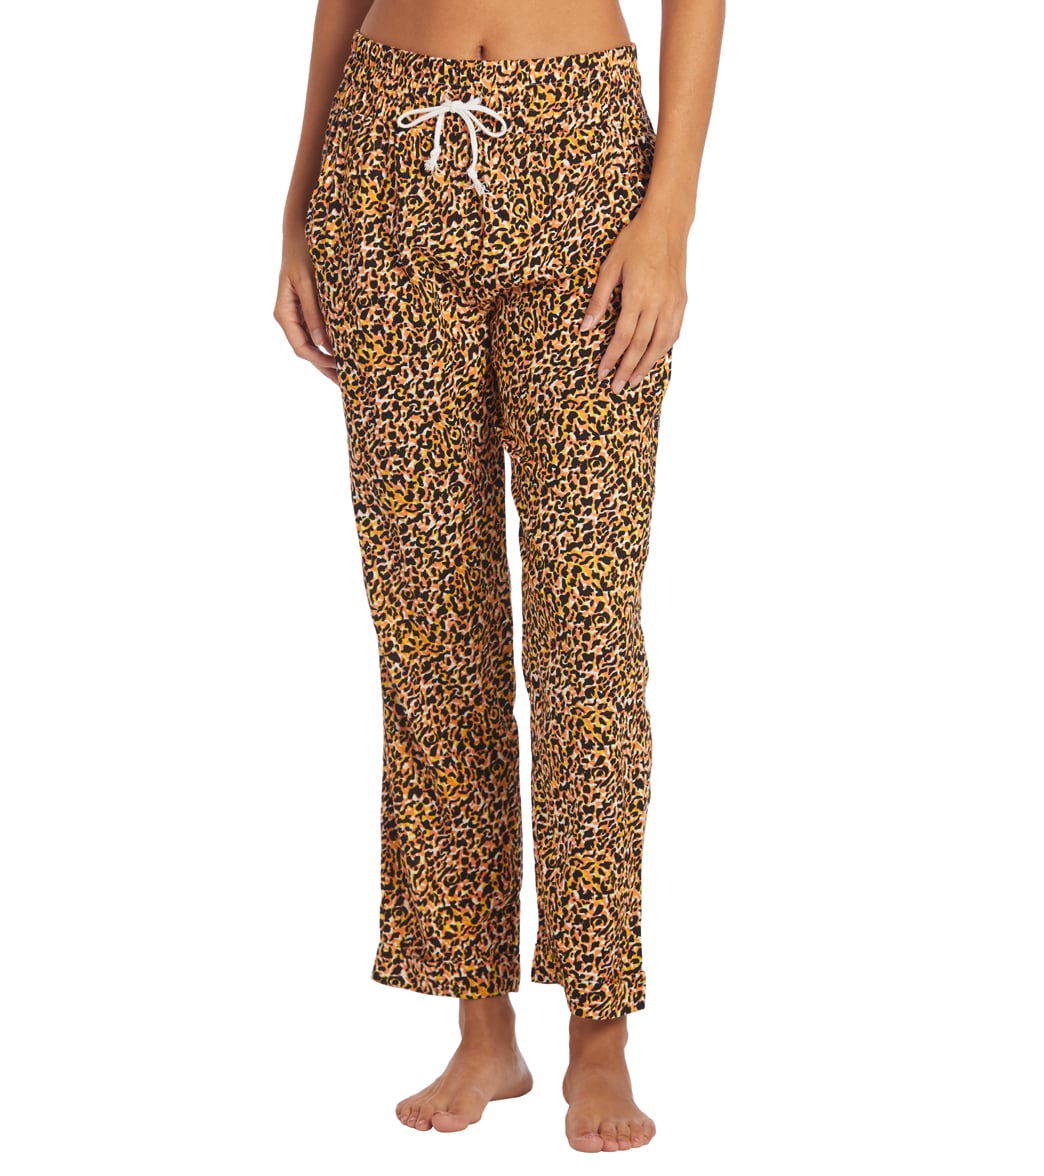 Hurley Women's Easy Rolled Cuff Pants - Wild Party Medium - Swimoutlet.com